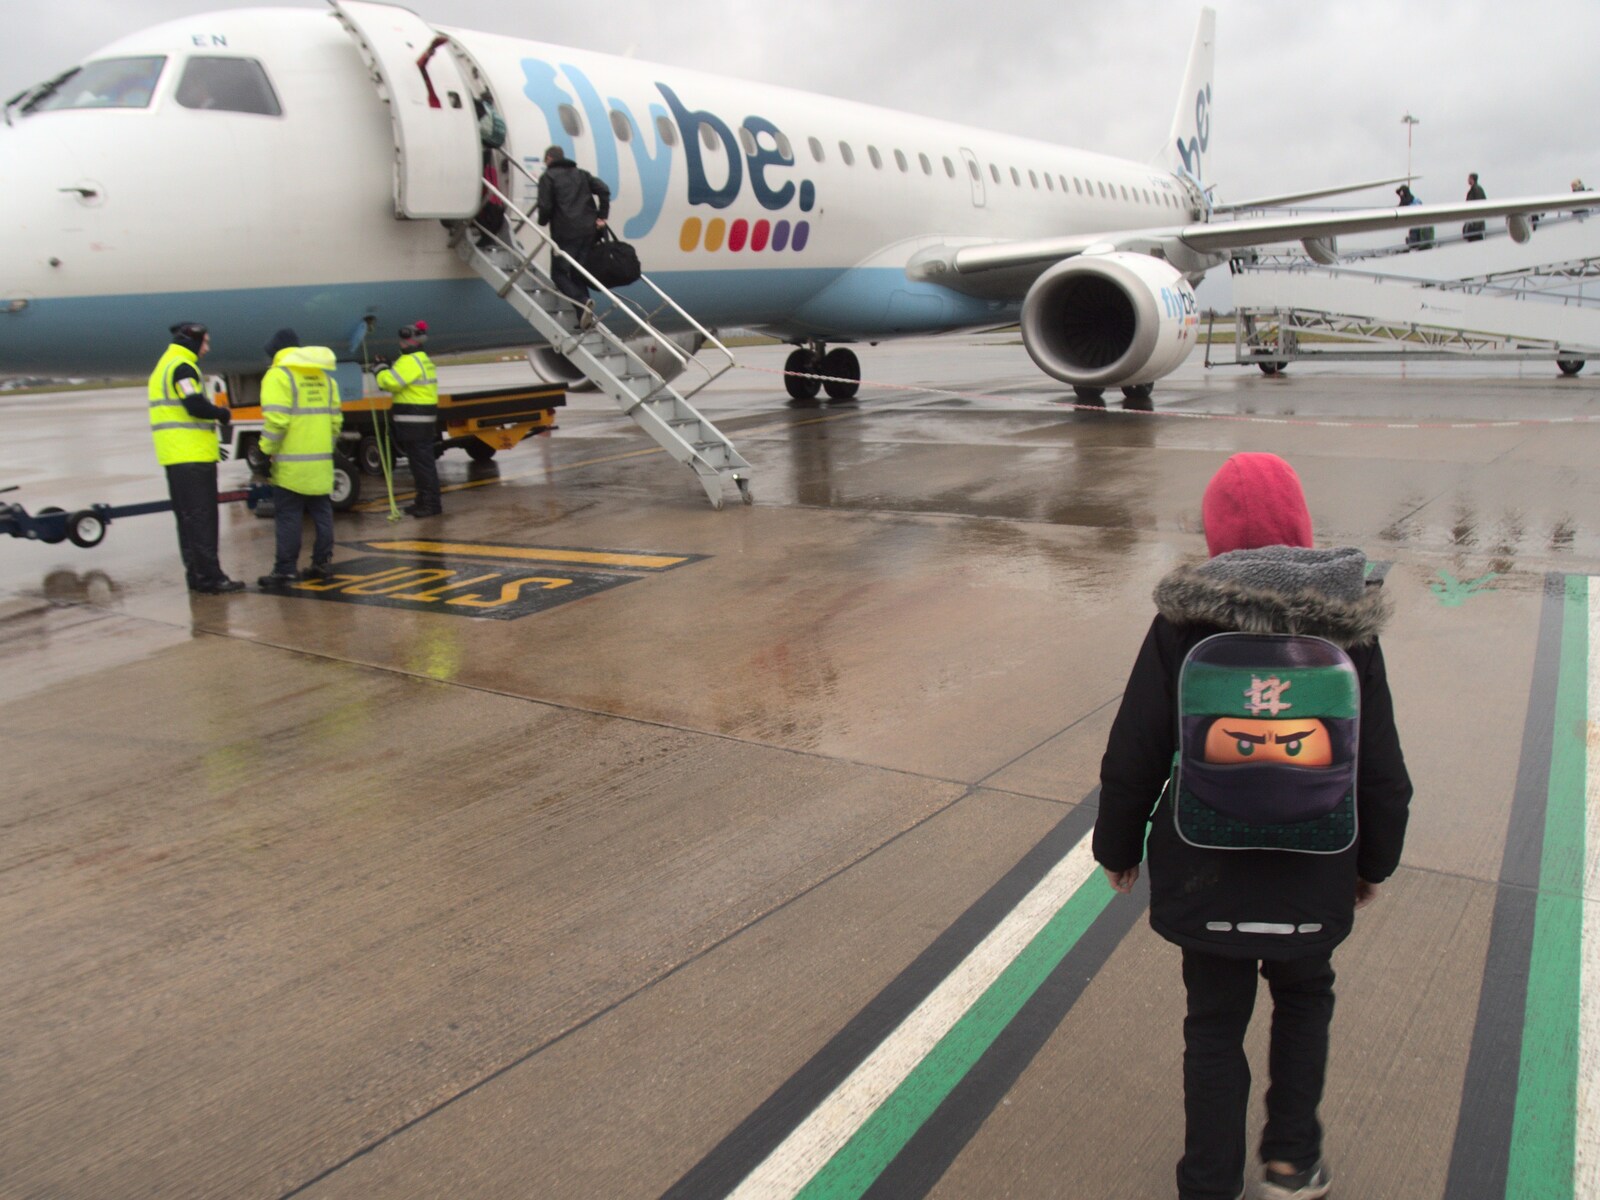 Fred walks up to the FlyBe plane from An End-of-Year Trip to Spreyton, Devon - 29th December 2017